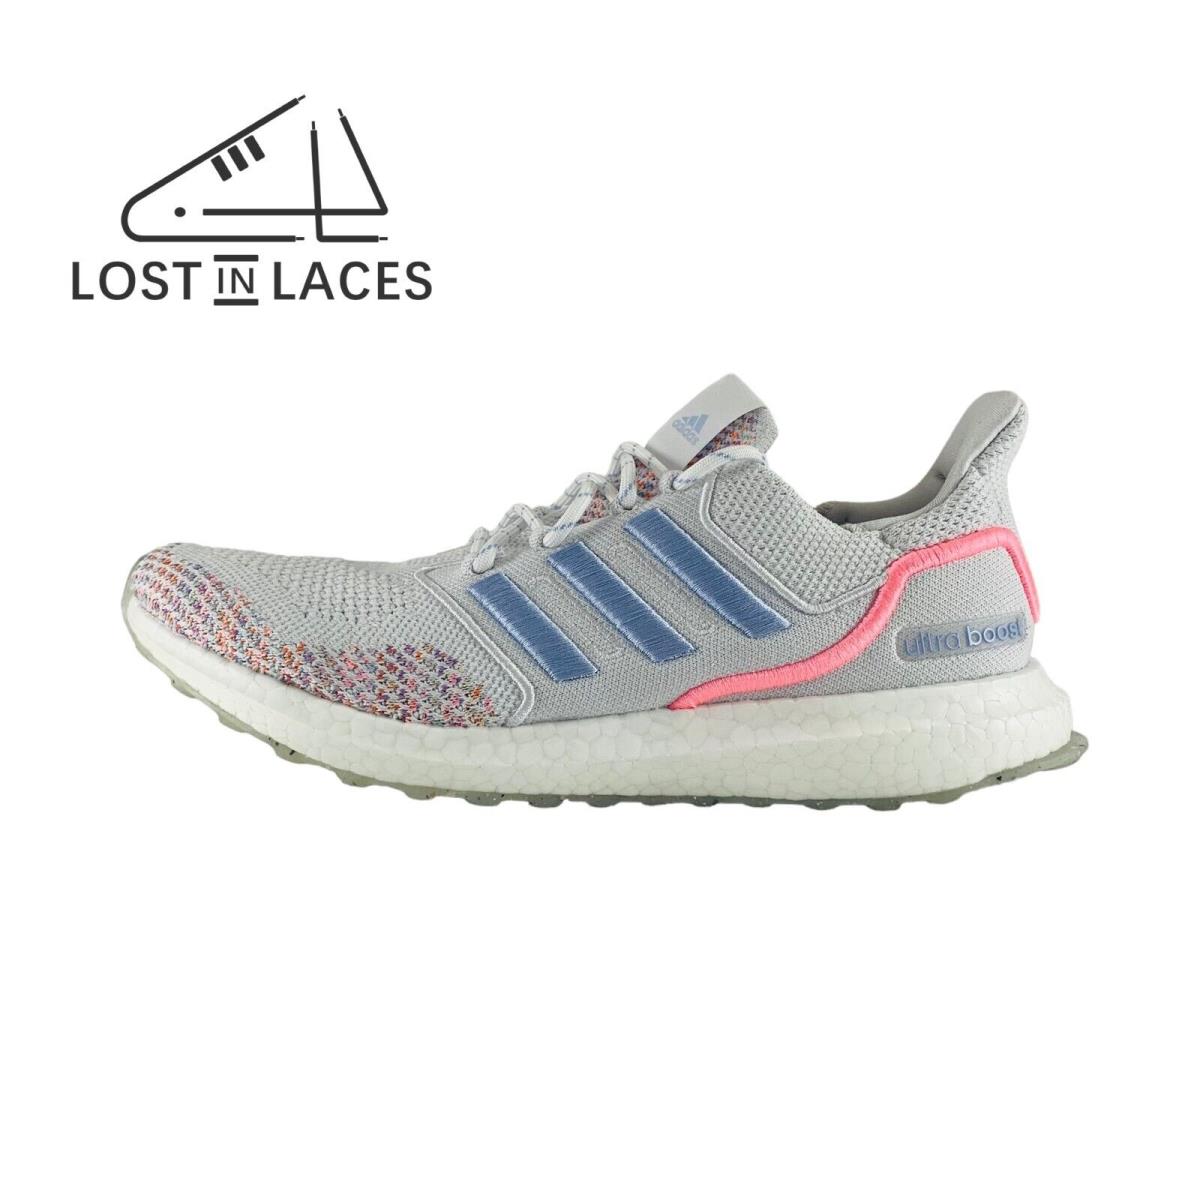 Adidas Ultraboost 1.0 White Blue Dawn Pink Running Shoes Women`s Sizes - White